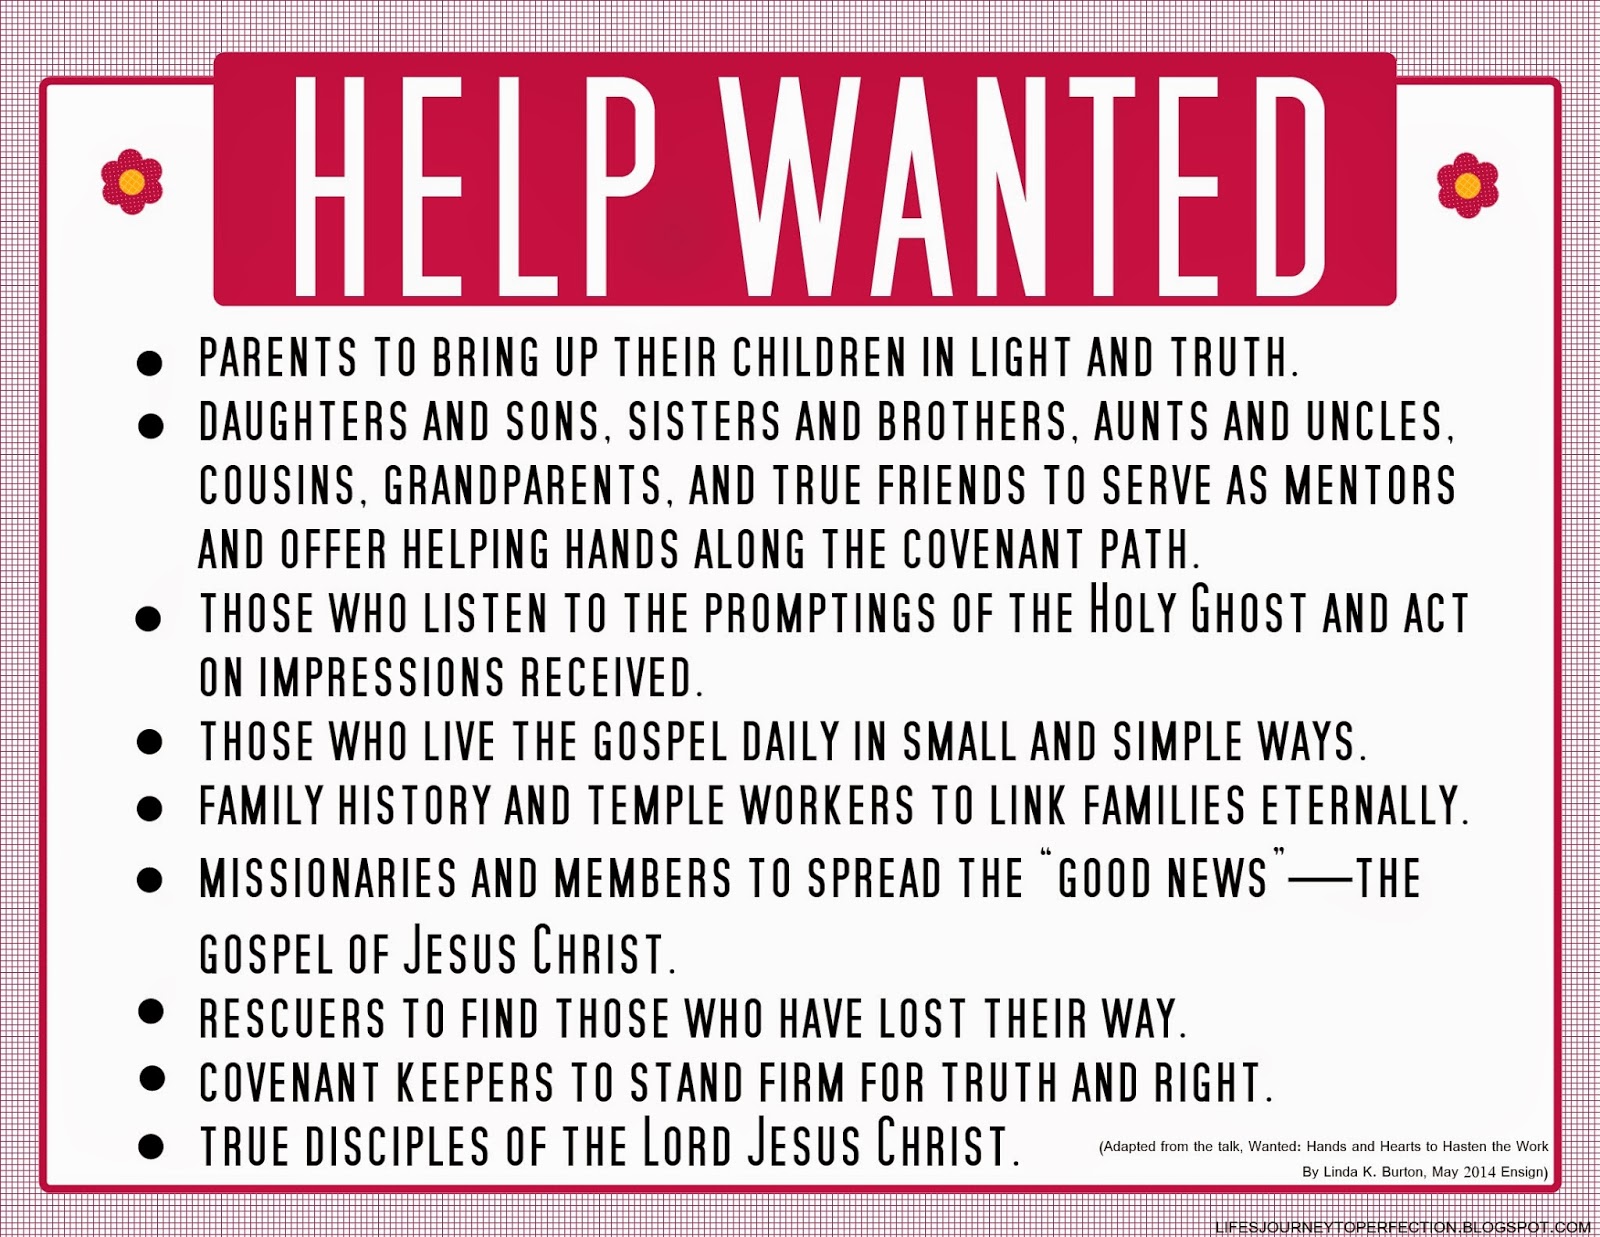 Writer wanted. Help wanted. Spread the Gospel. Helpers wanted что писать. Wanted Flyer.